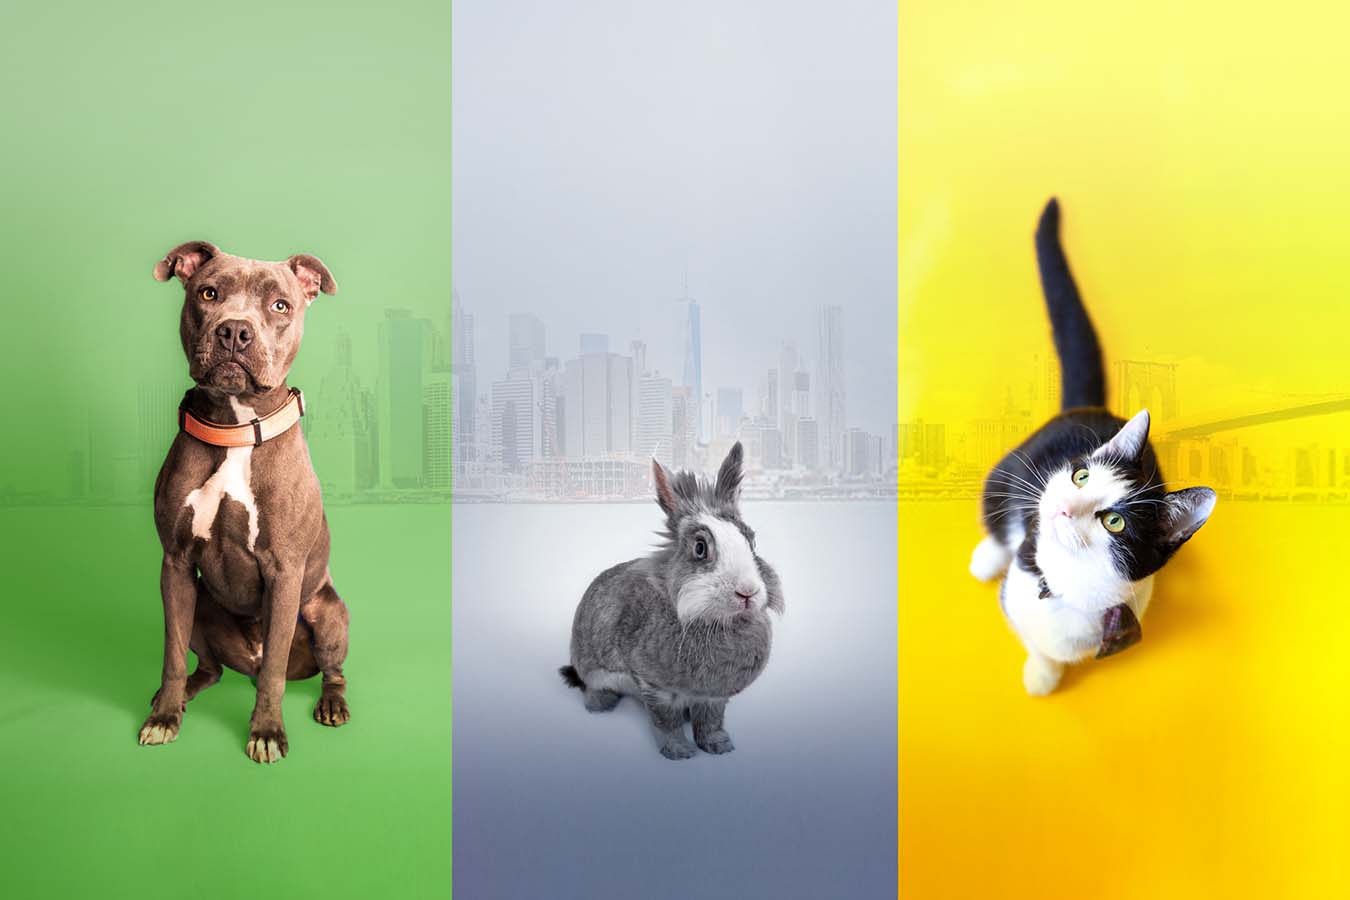 Dog, rabbit, cat and NYC background